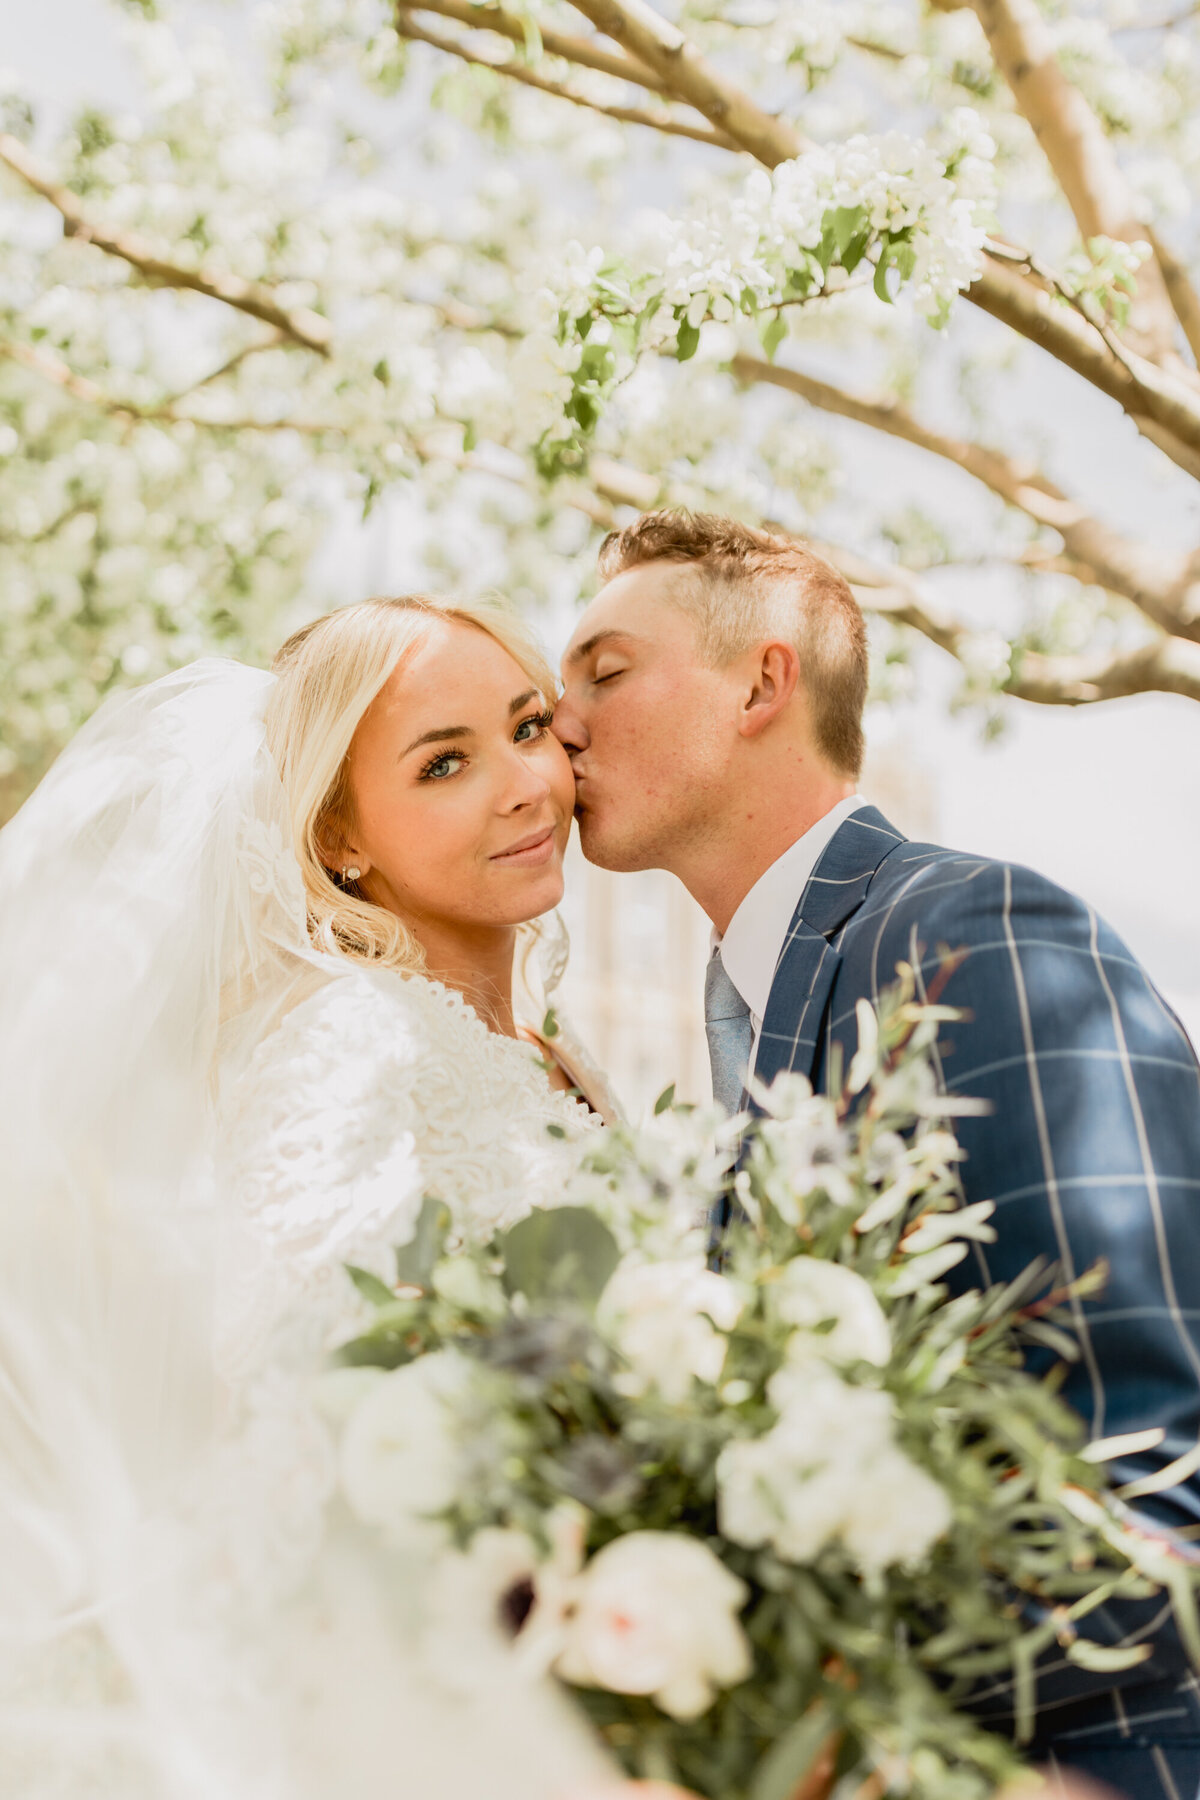 Max kisses Jade on their wedding day at the Logan. Utah Temple on their summer wedding day